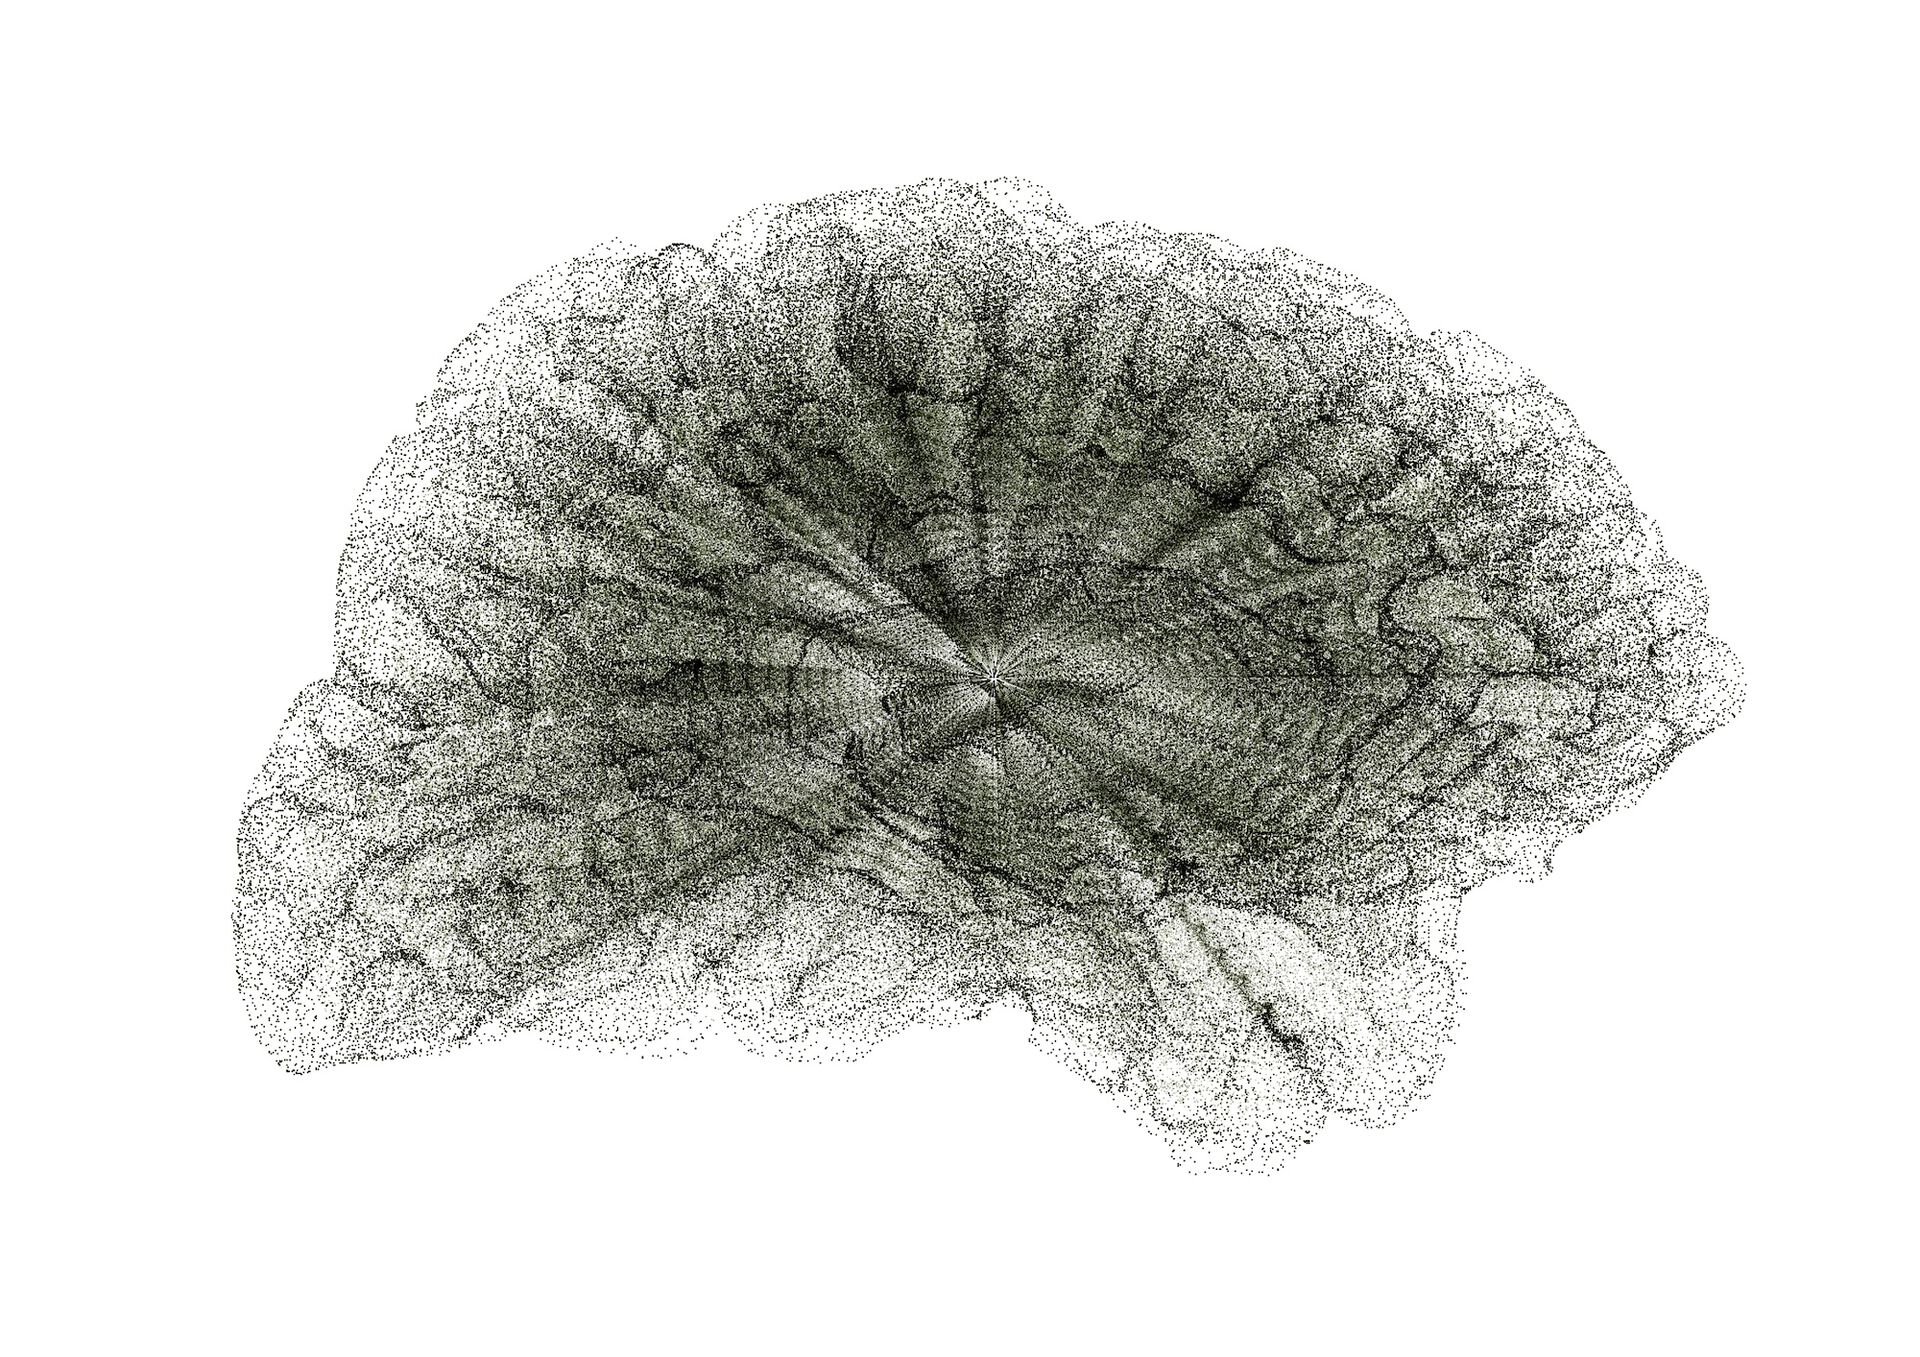 An illustration of the brain